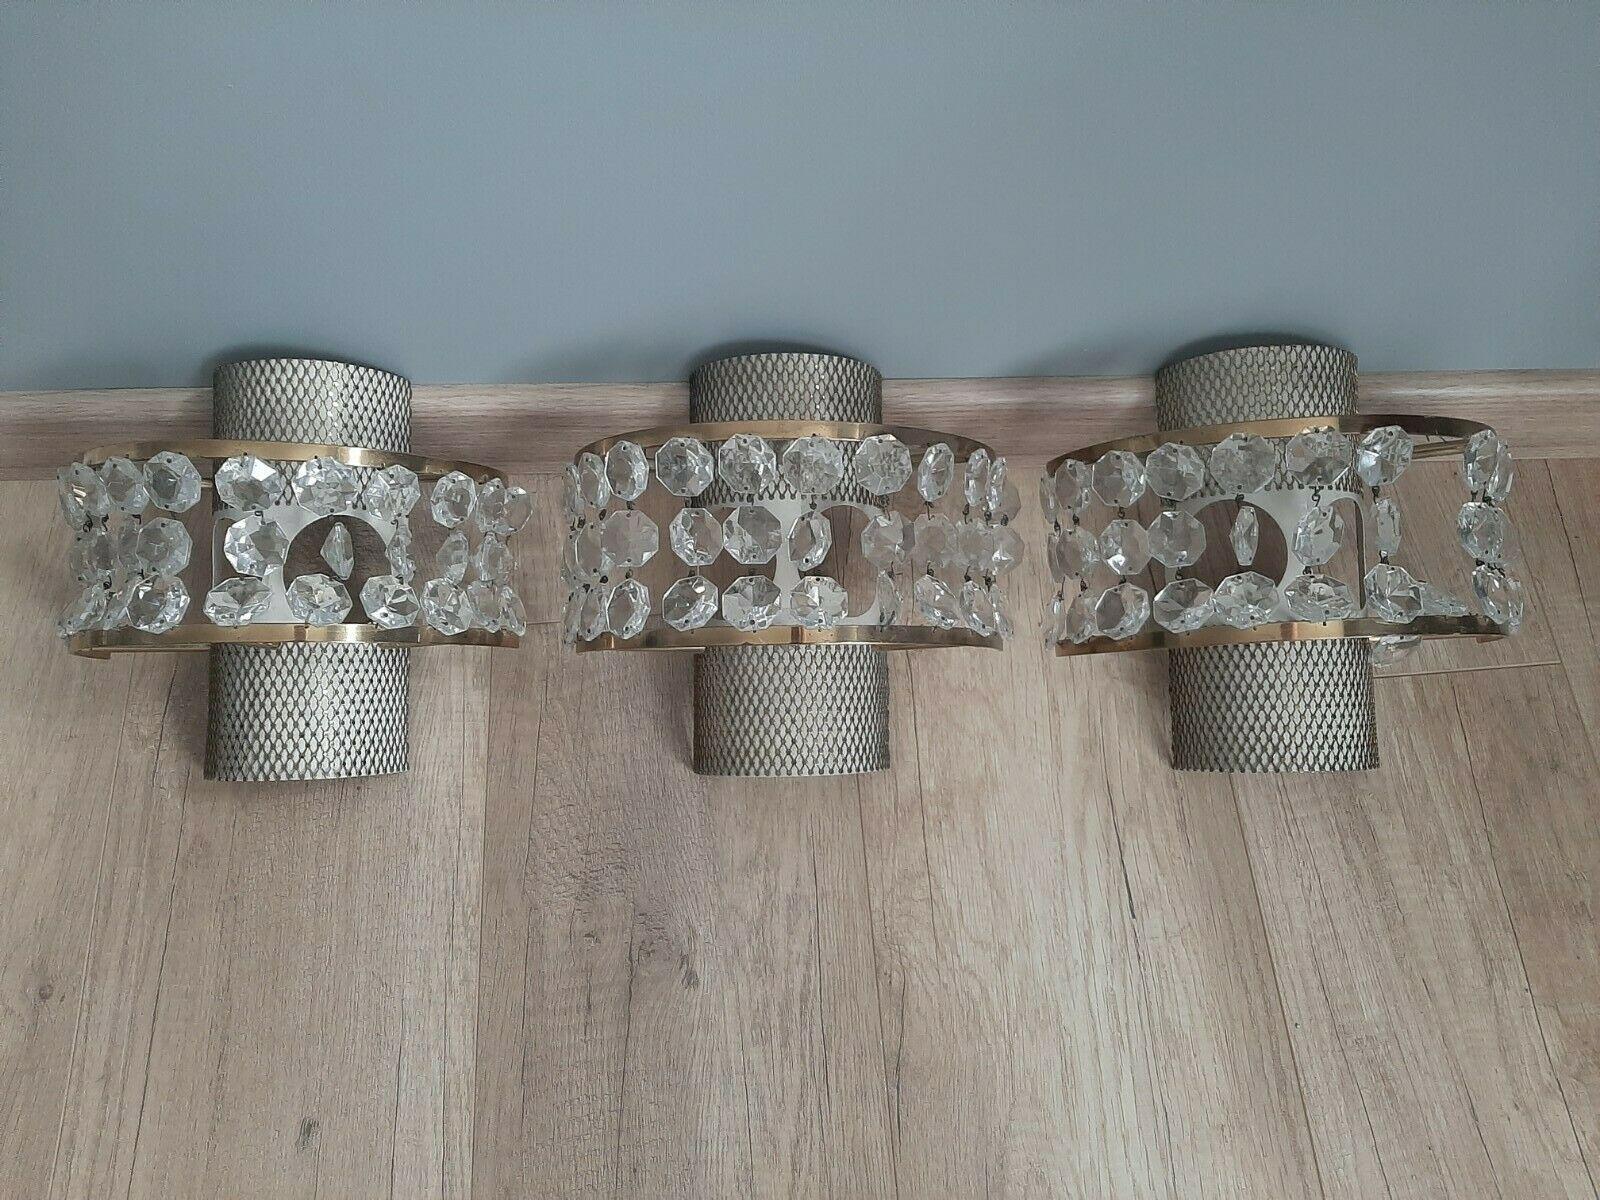 1960's Set of 3 Italian Modernist Brass Patterned with Glass Strands Wall Sconces by Bruno Gatta Stilnovo. I found these beauties in Italy.